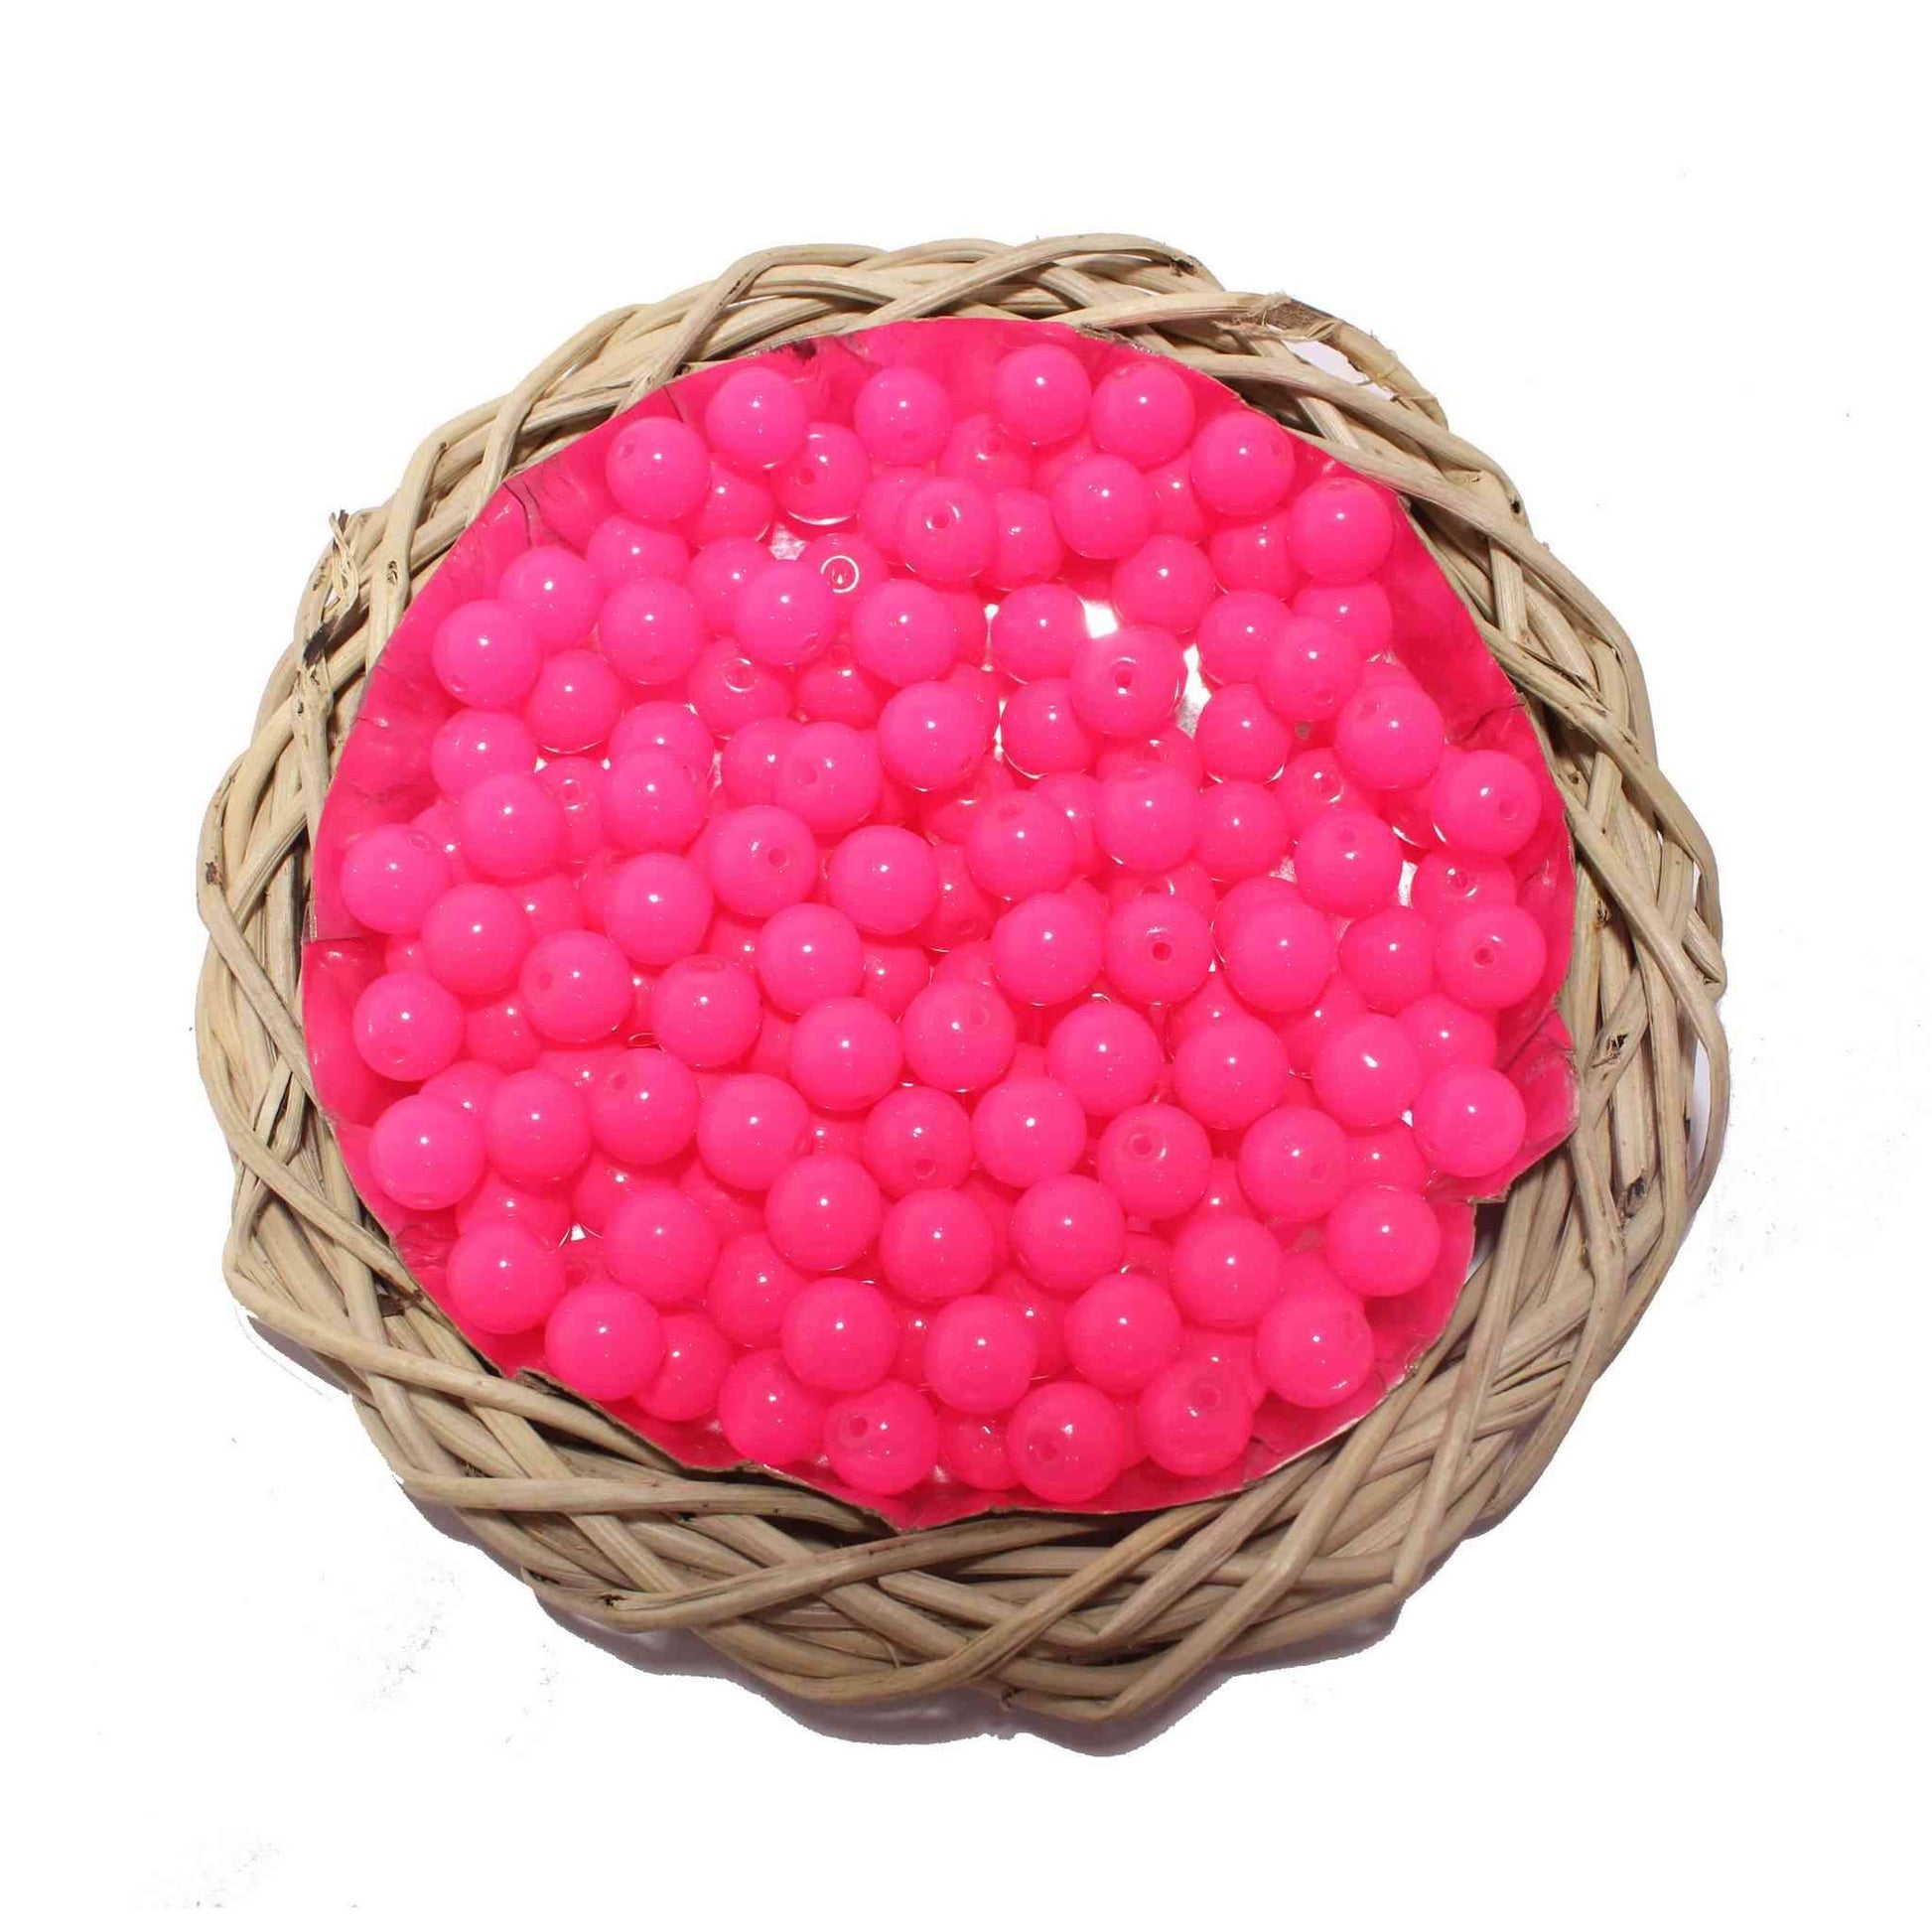 Premium quality Round shape Glass Beads for DIY Craft, Trousseau Packing or Decoration - Design 725, 10mm, Deep Pink - Indian Petals